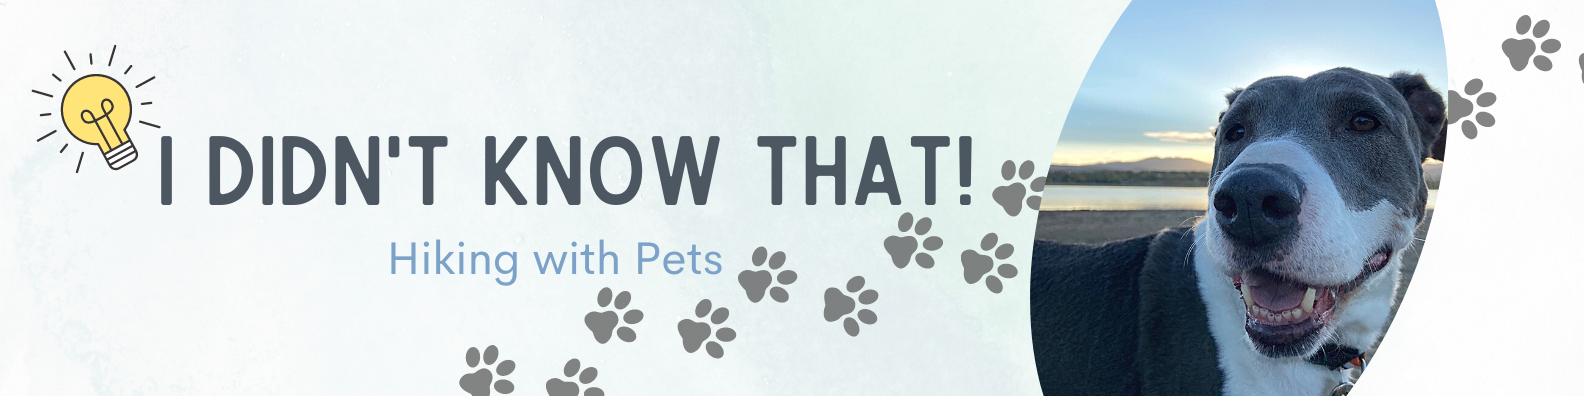 I Didn't Know That! Hiking with Pets